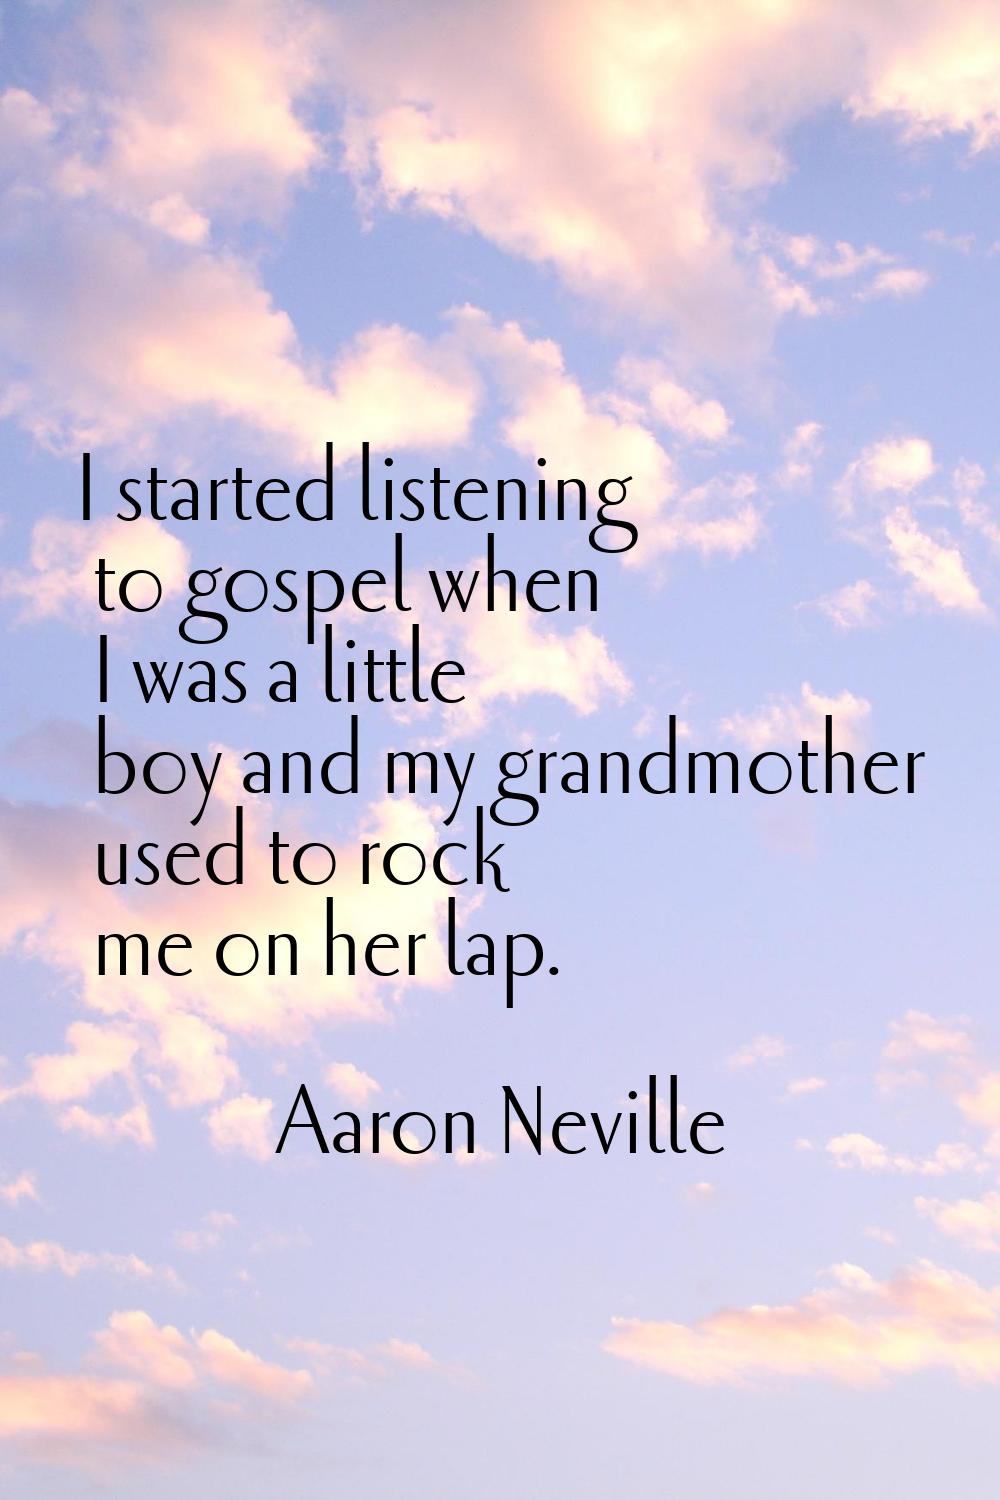 I started listening to gospel when I was a little boy and my grandmother used to rock me on her lap